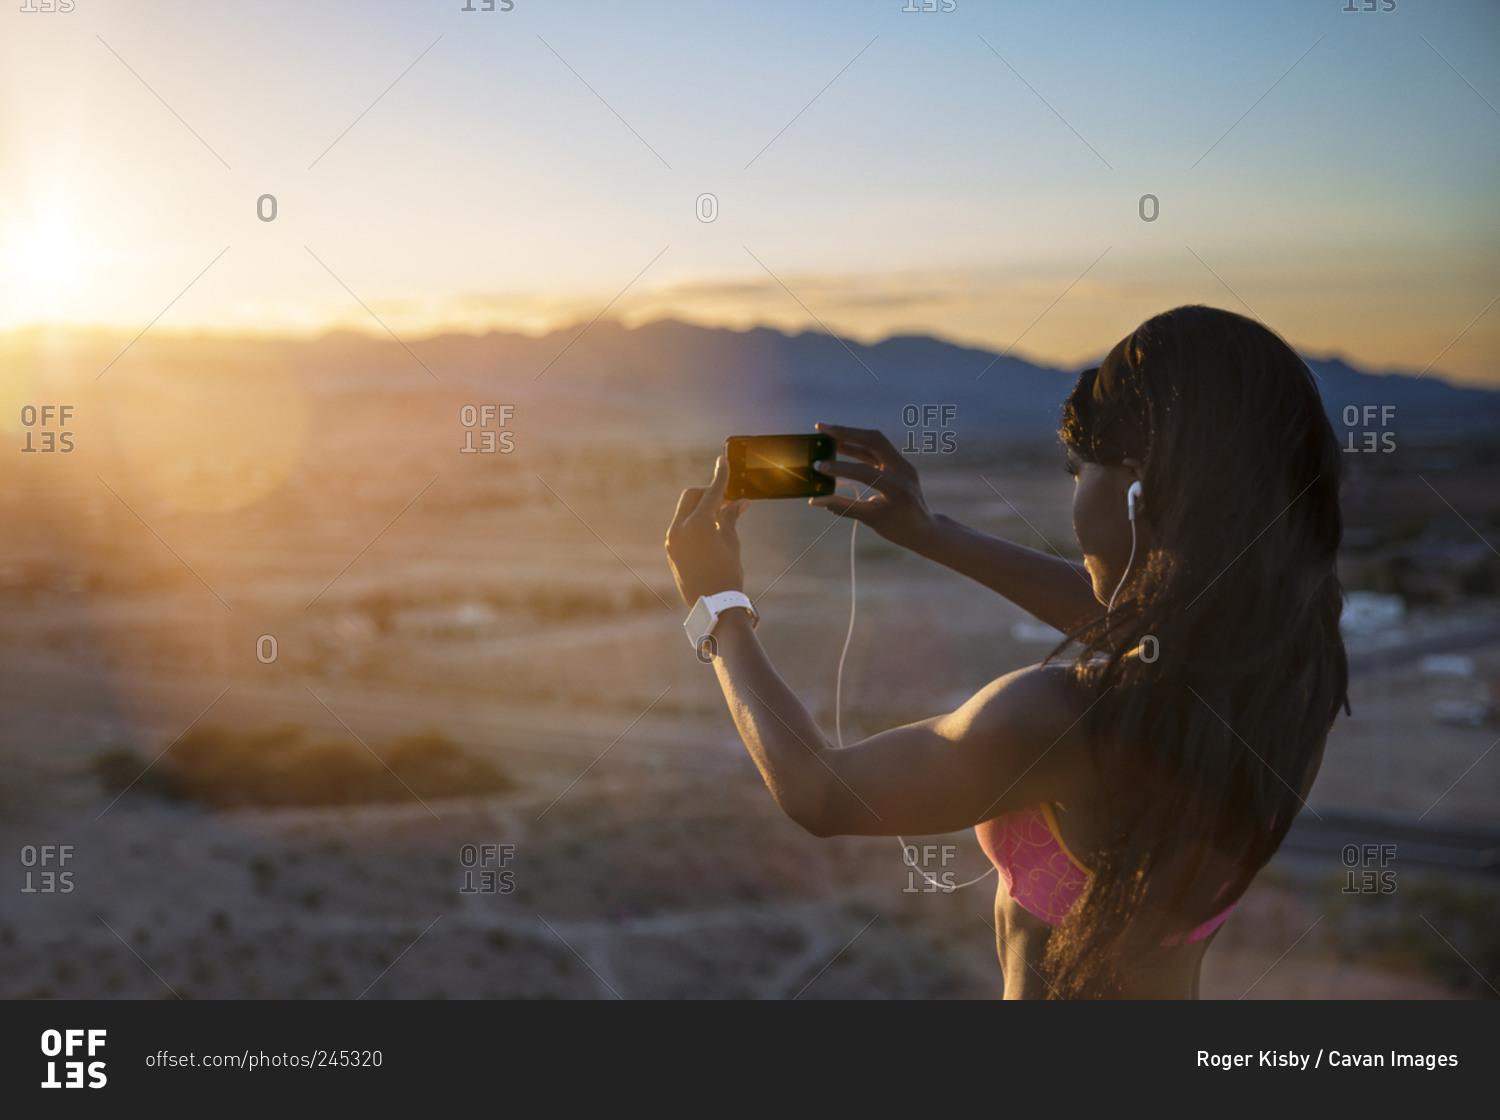 Athletic woman taking picture of desert setting